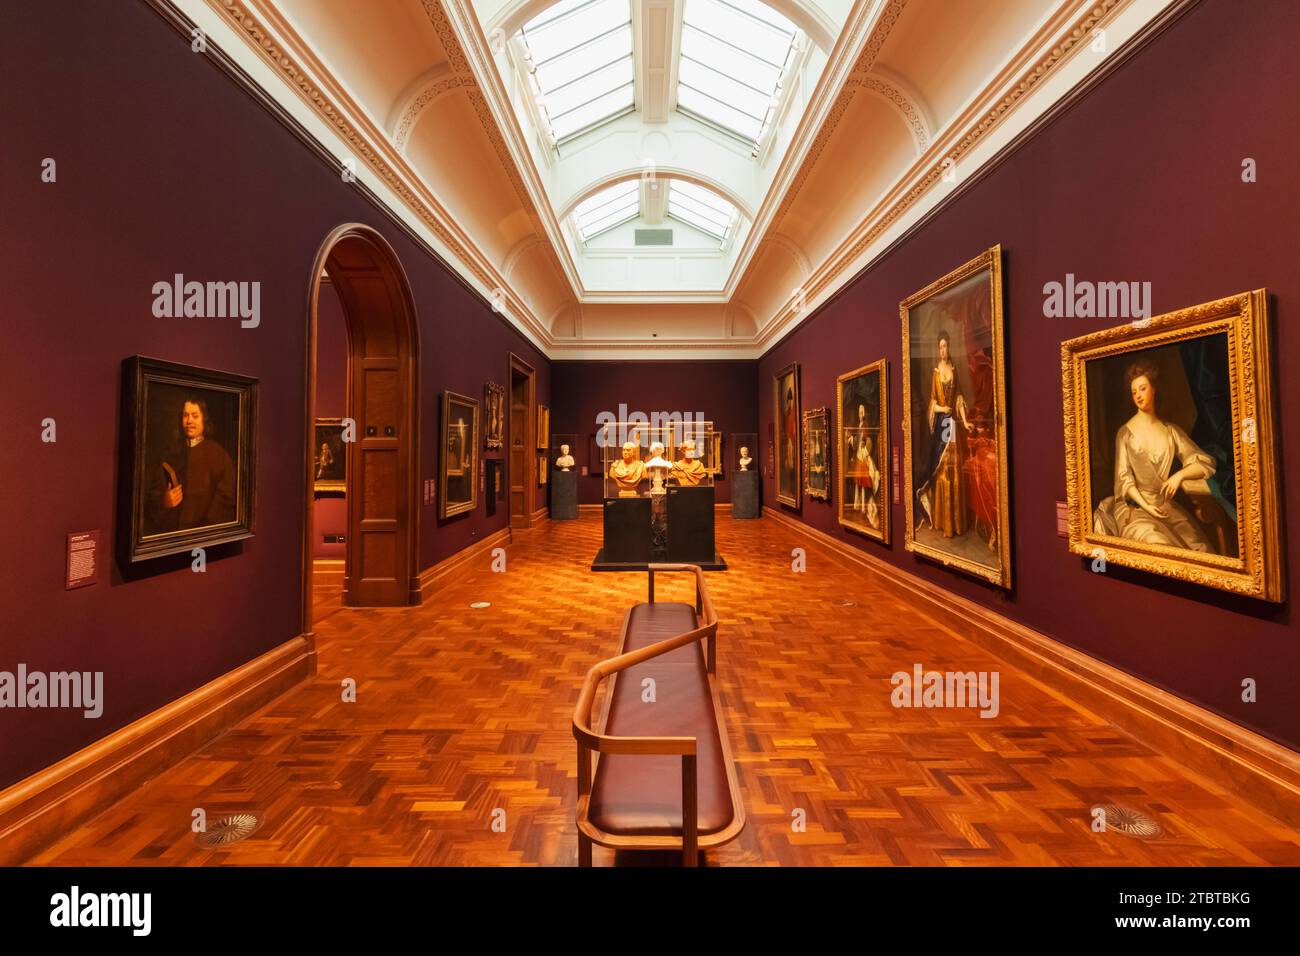 England, London, National Portrait Gallery, interior view Stock Photo